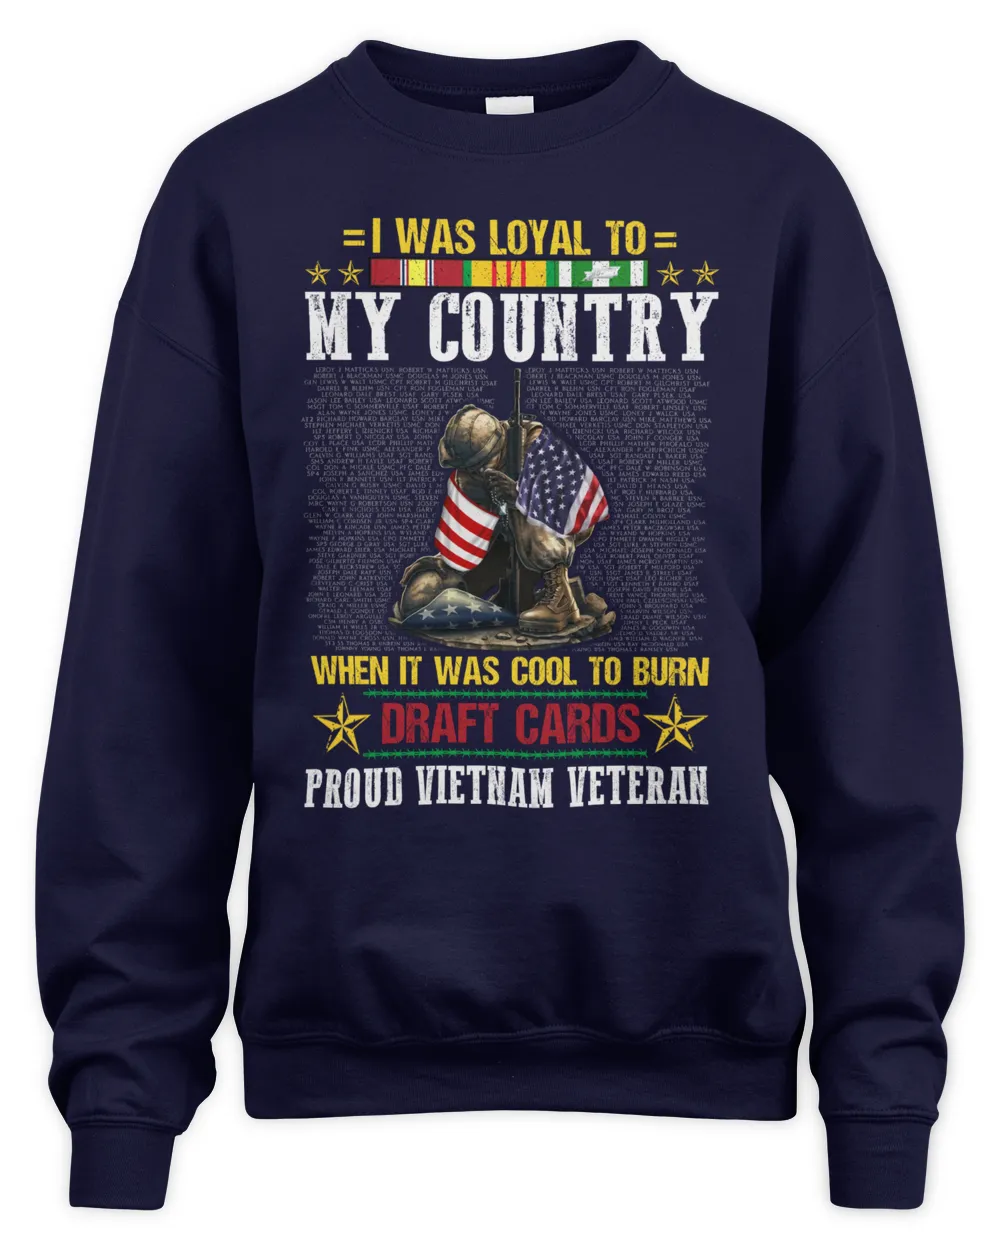 I WAS LOYAL TO MY COUNTRY WHEN IT WAS COOL TO BURN DRAFT CARDS PROUD VIETNAM VETERAN